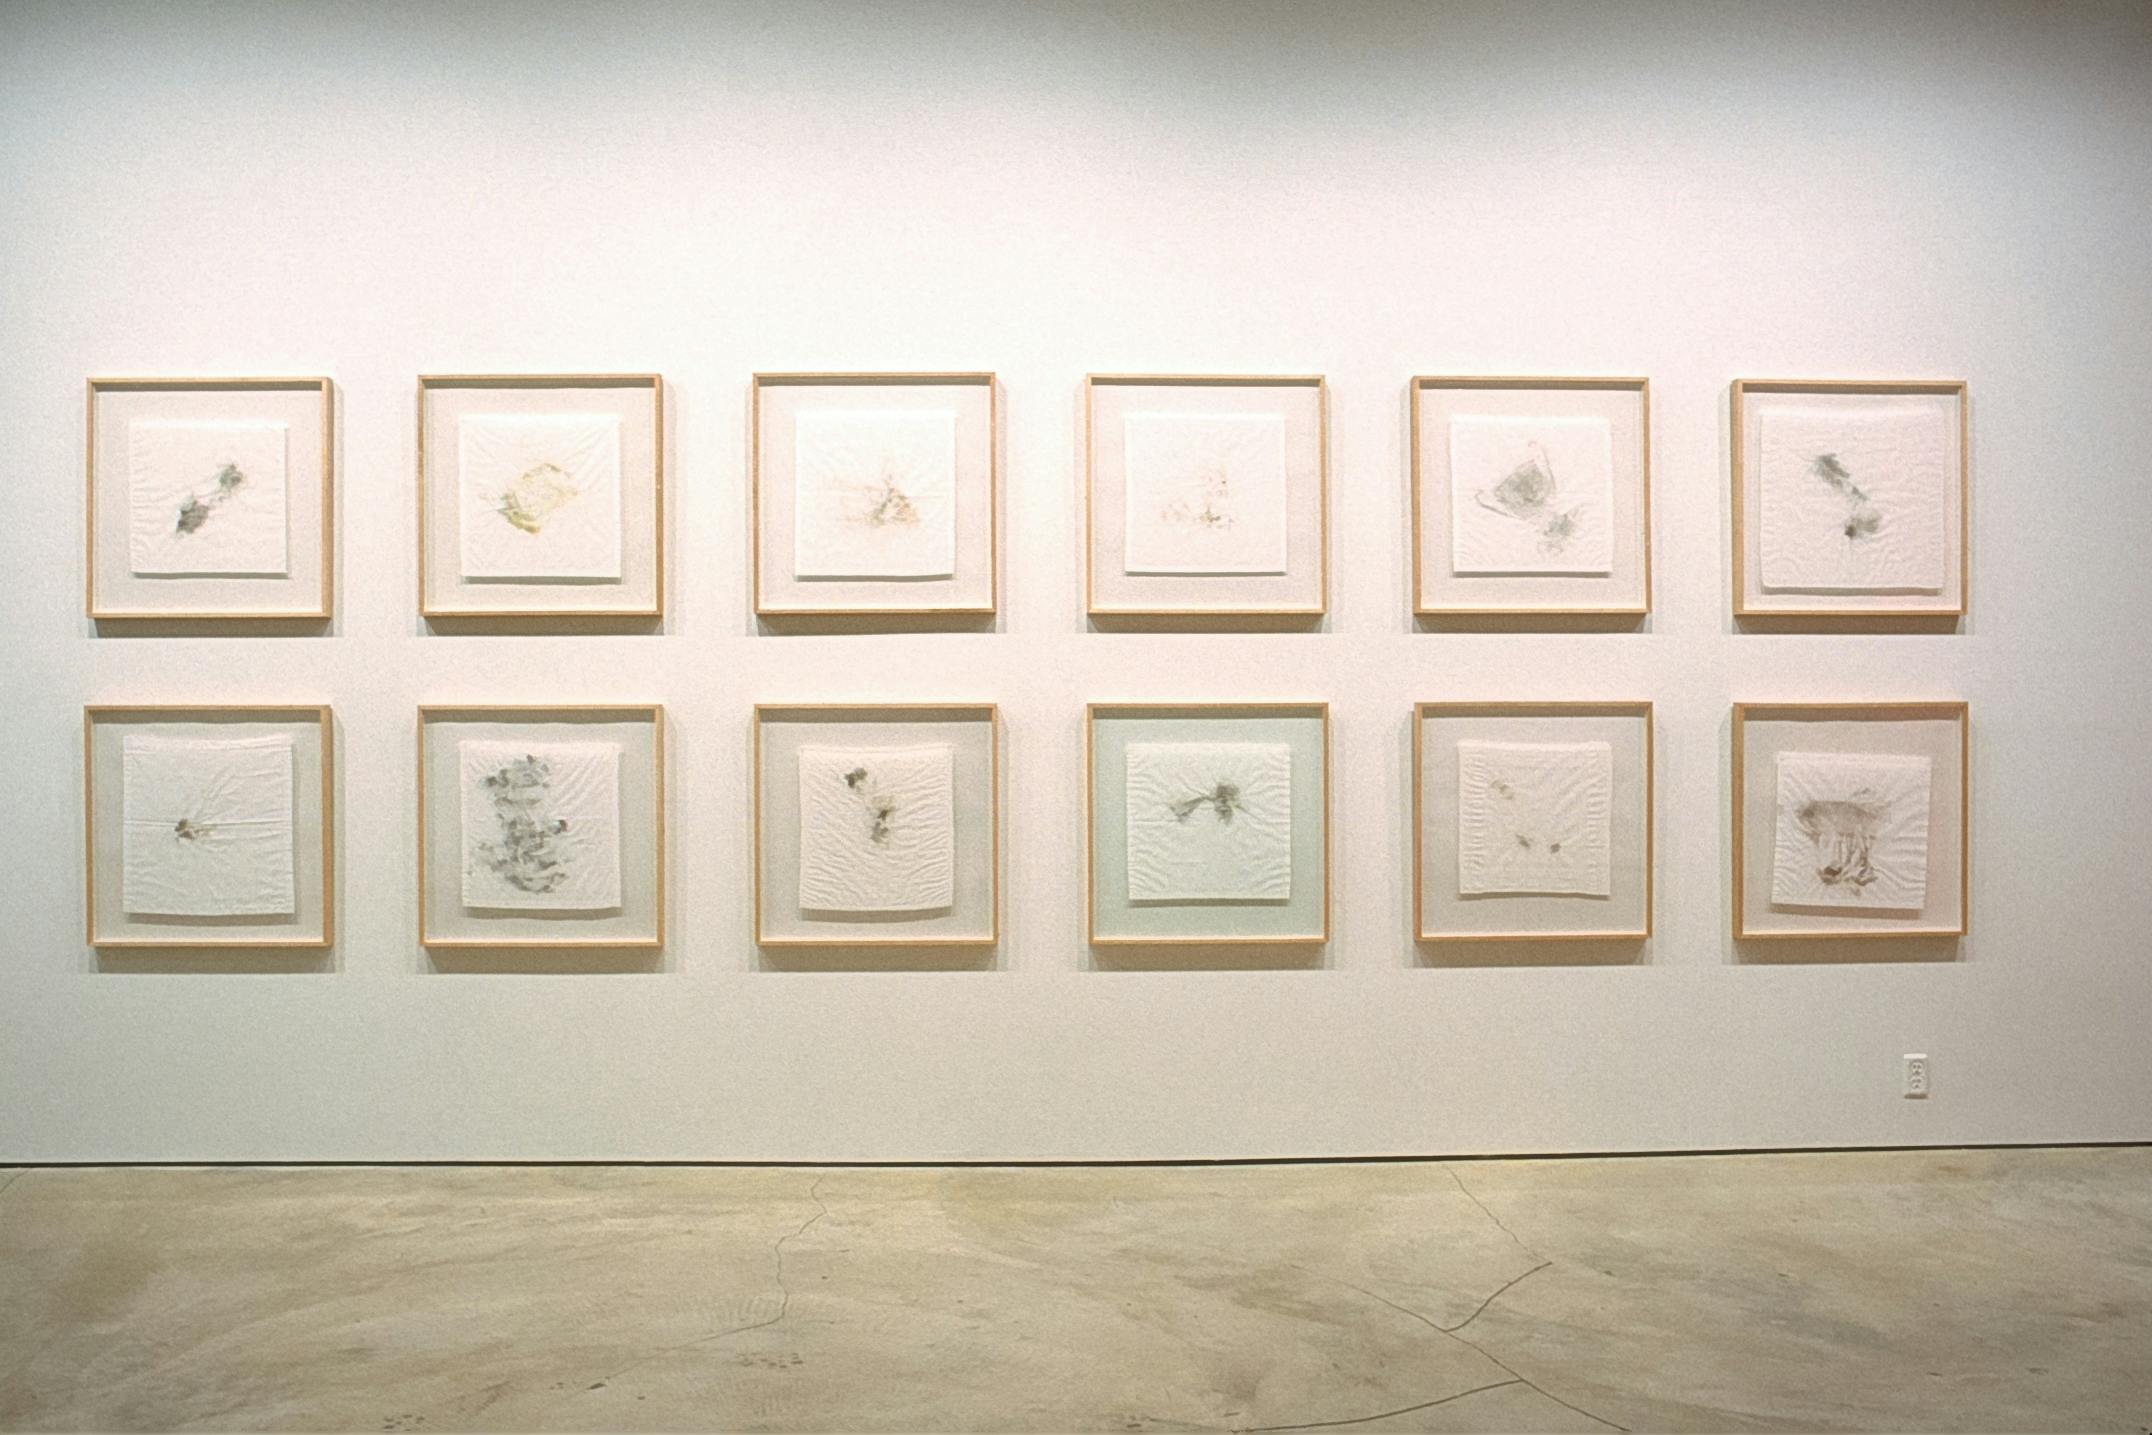 Twelve art pieces are installed on the gallery wall. They are white handkerchiefs framed in identical-sized squares. There are varying shaped stains on the handkerchiefs.  